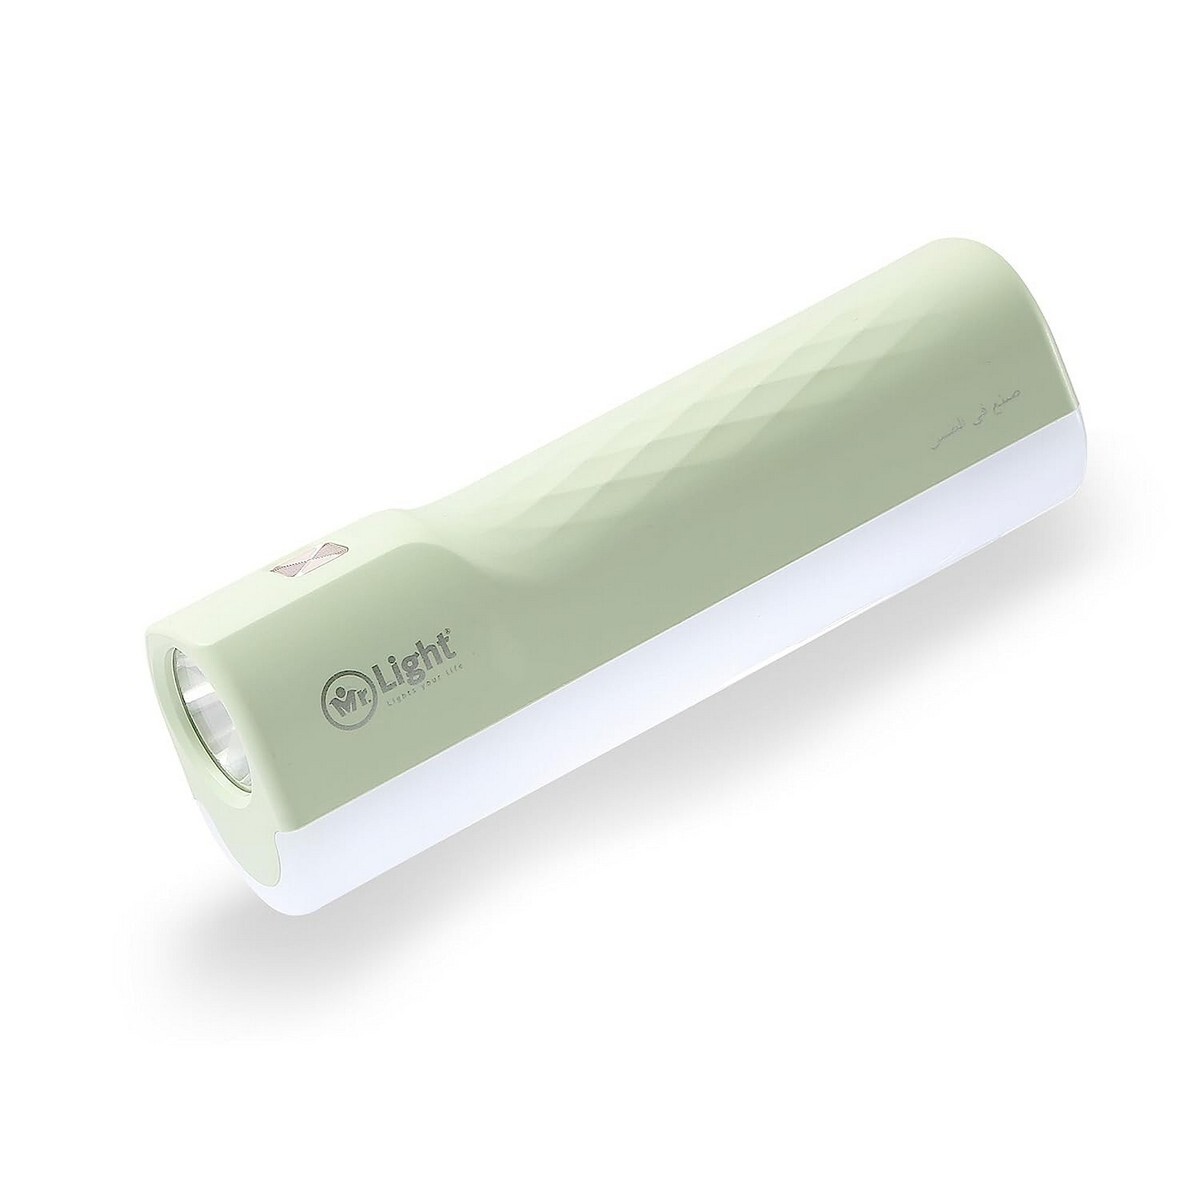 MR. Light Rechargeable Pocket Flashlight and Emergency Light MR GD003(Assorted Colours)